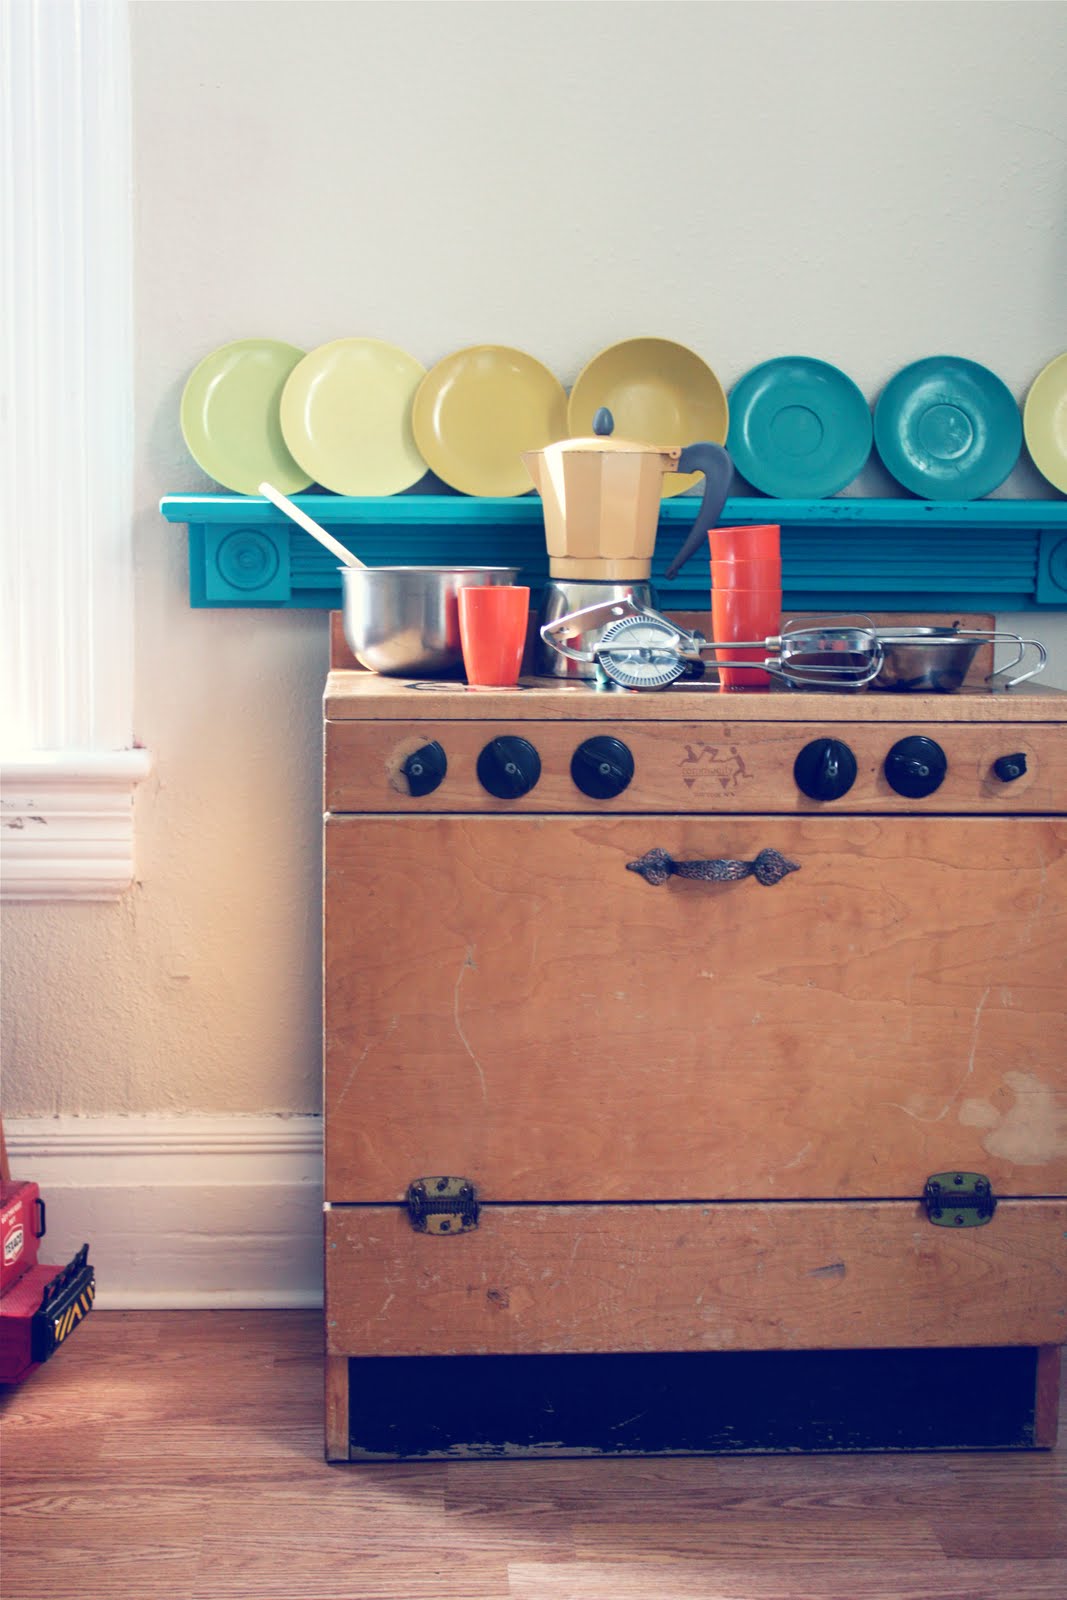 Smile and Wave: The Vintage Play Kitchen!